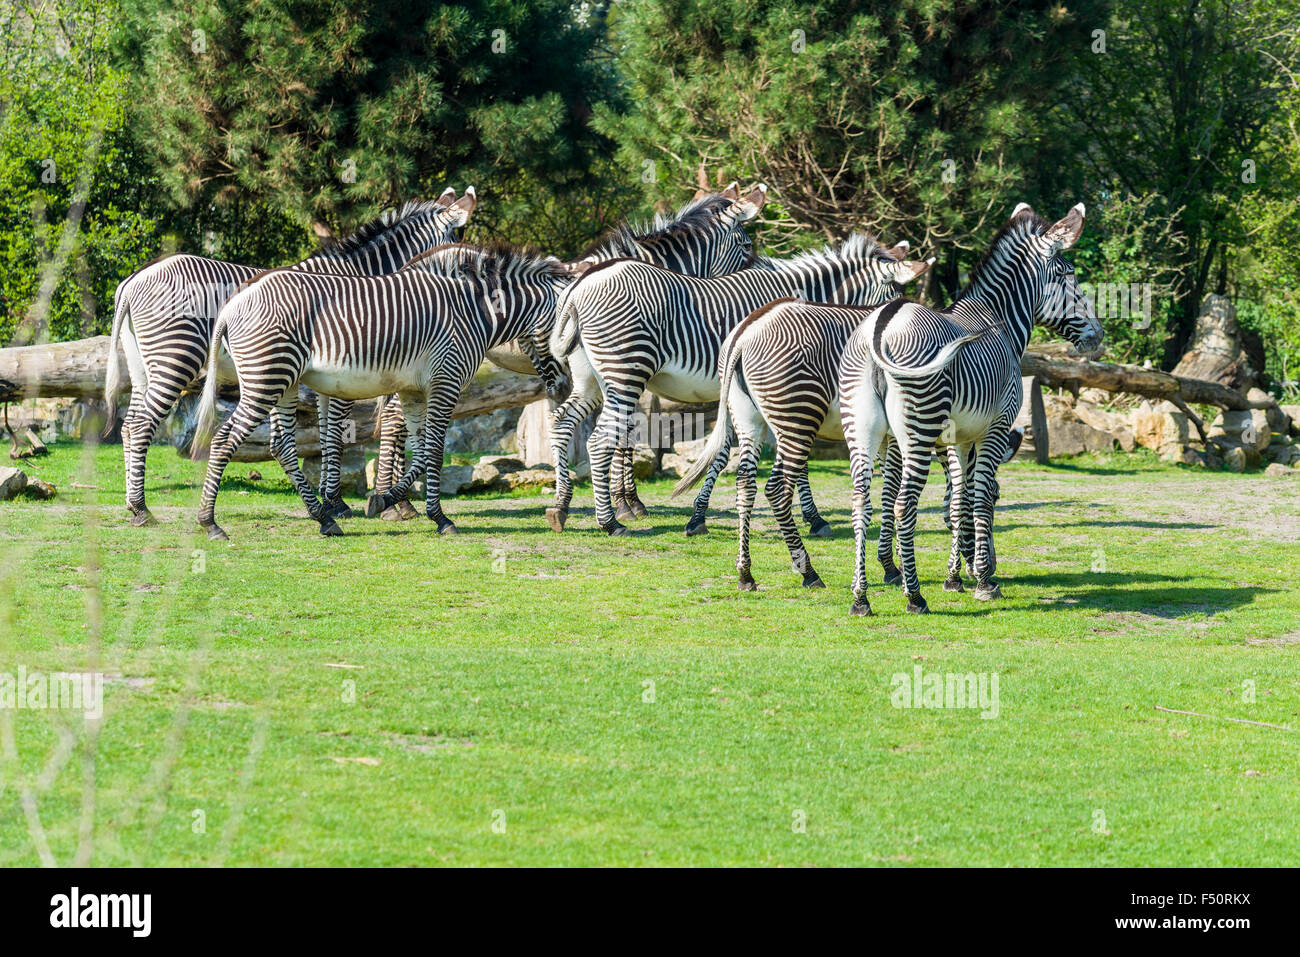 A group of Grevy's Zebras (Equus grevyi), standing on a meadow Stock Photo